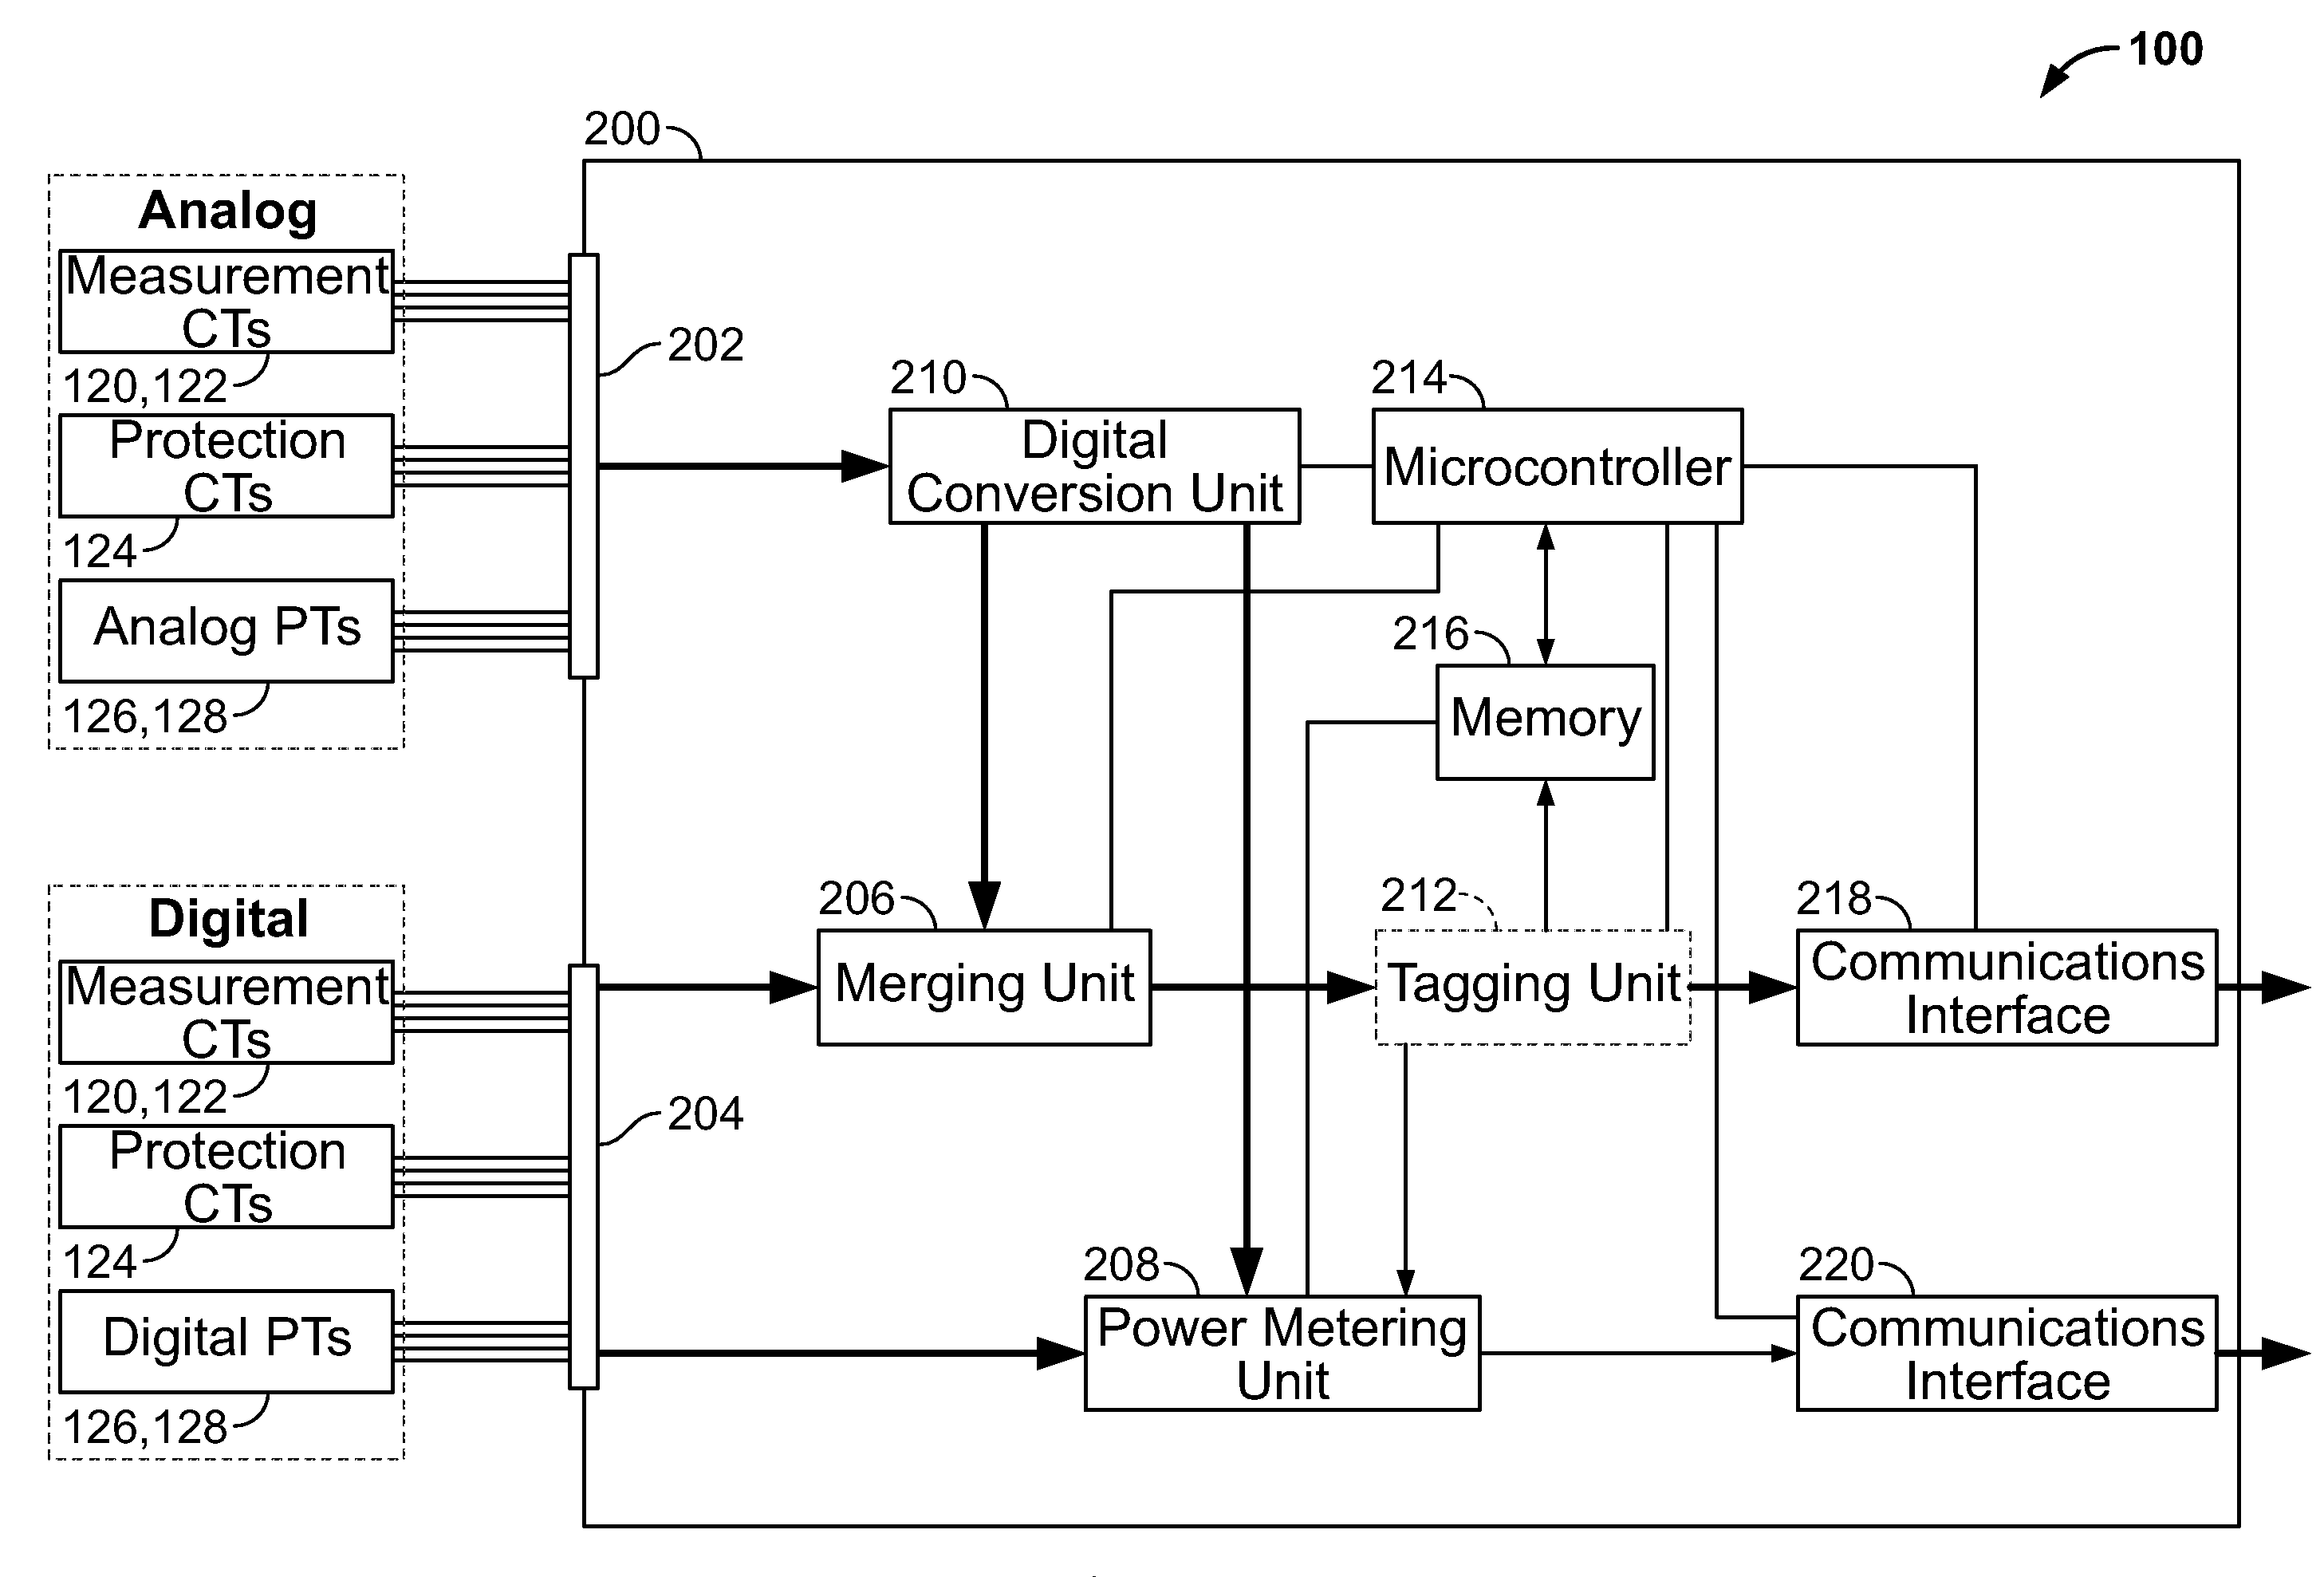 Power metering and merging unit capabilities in a single ied